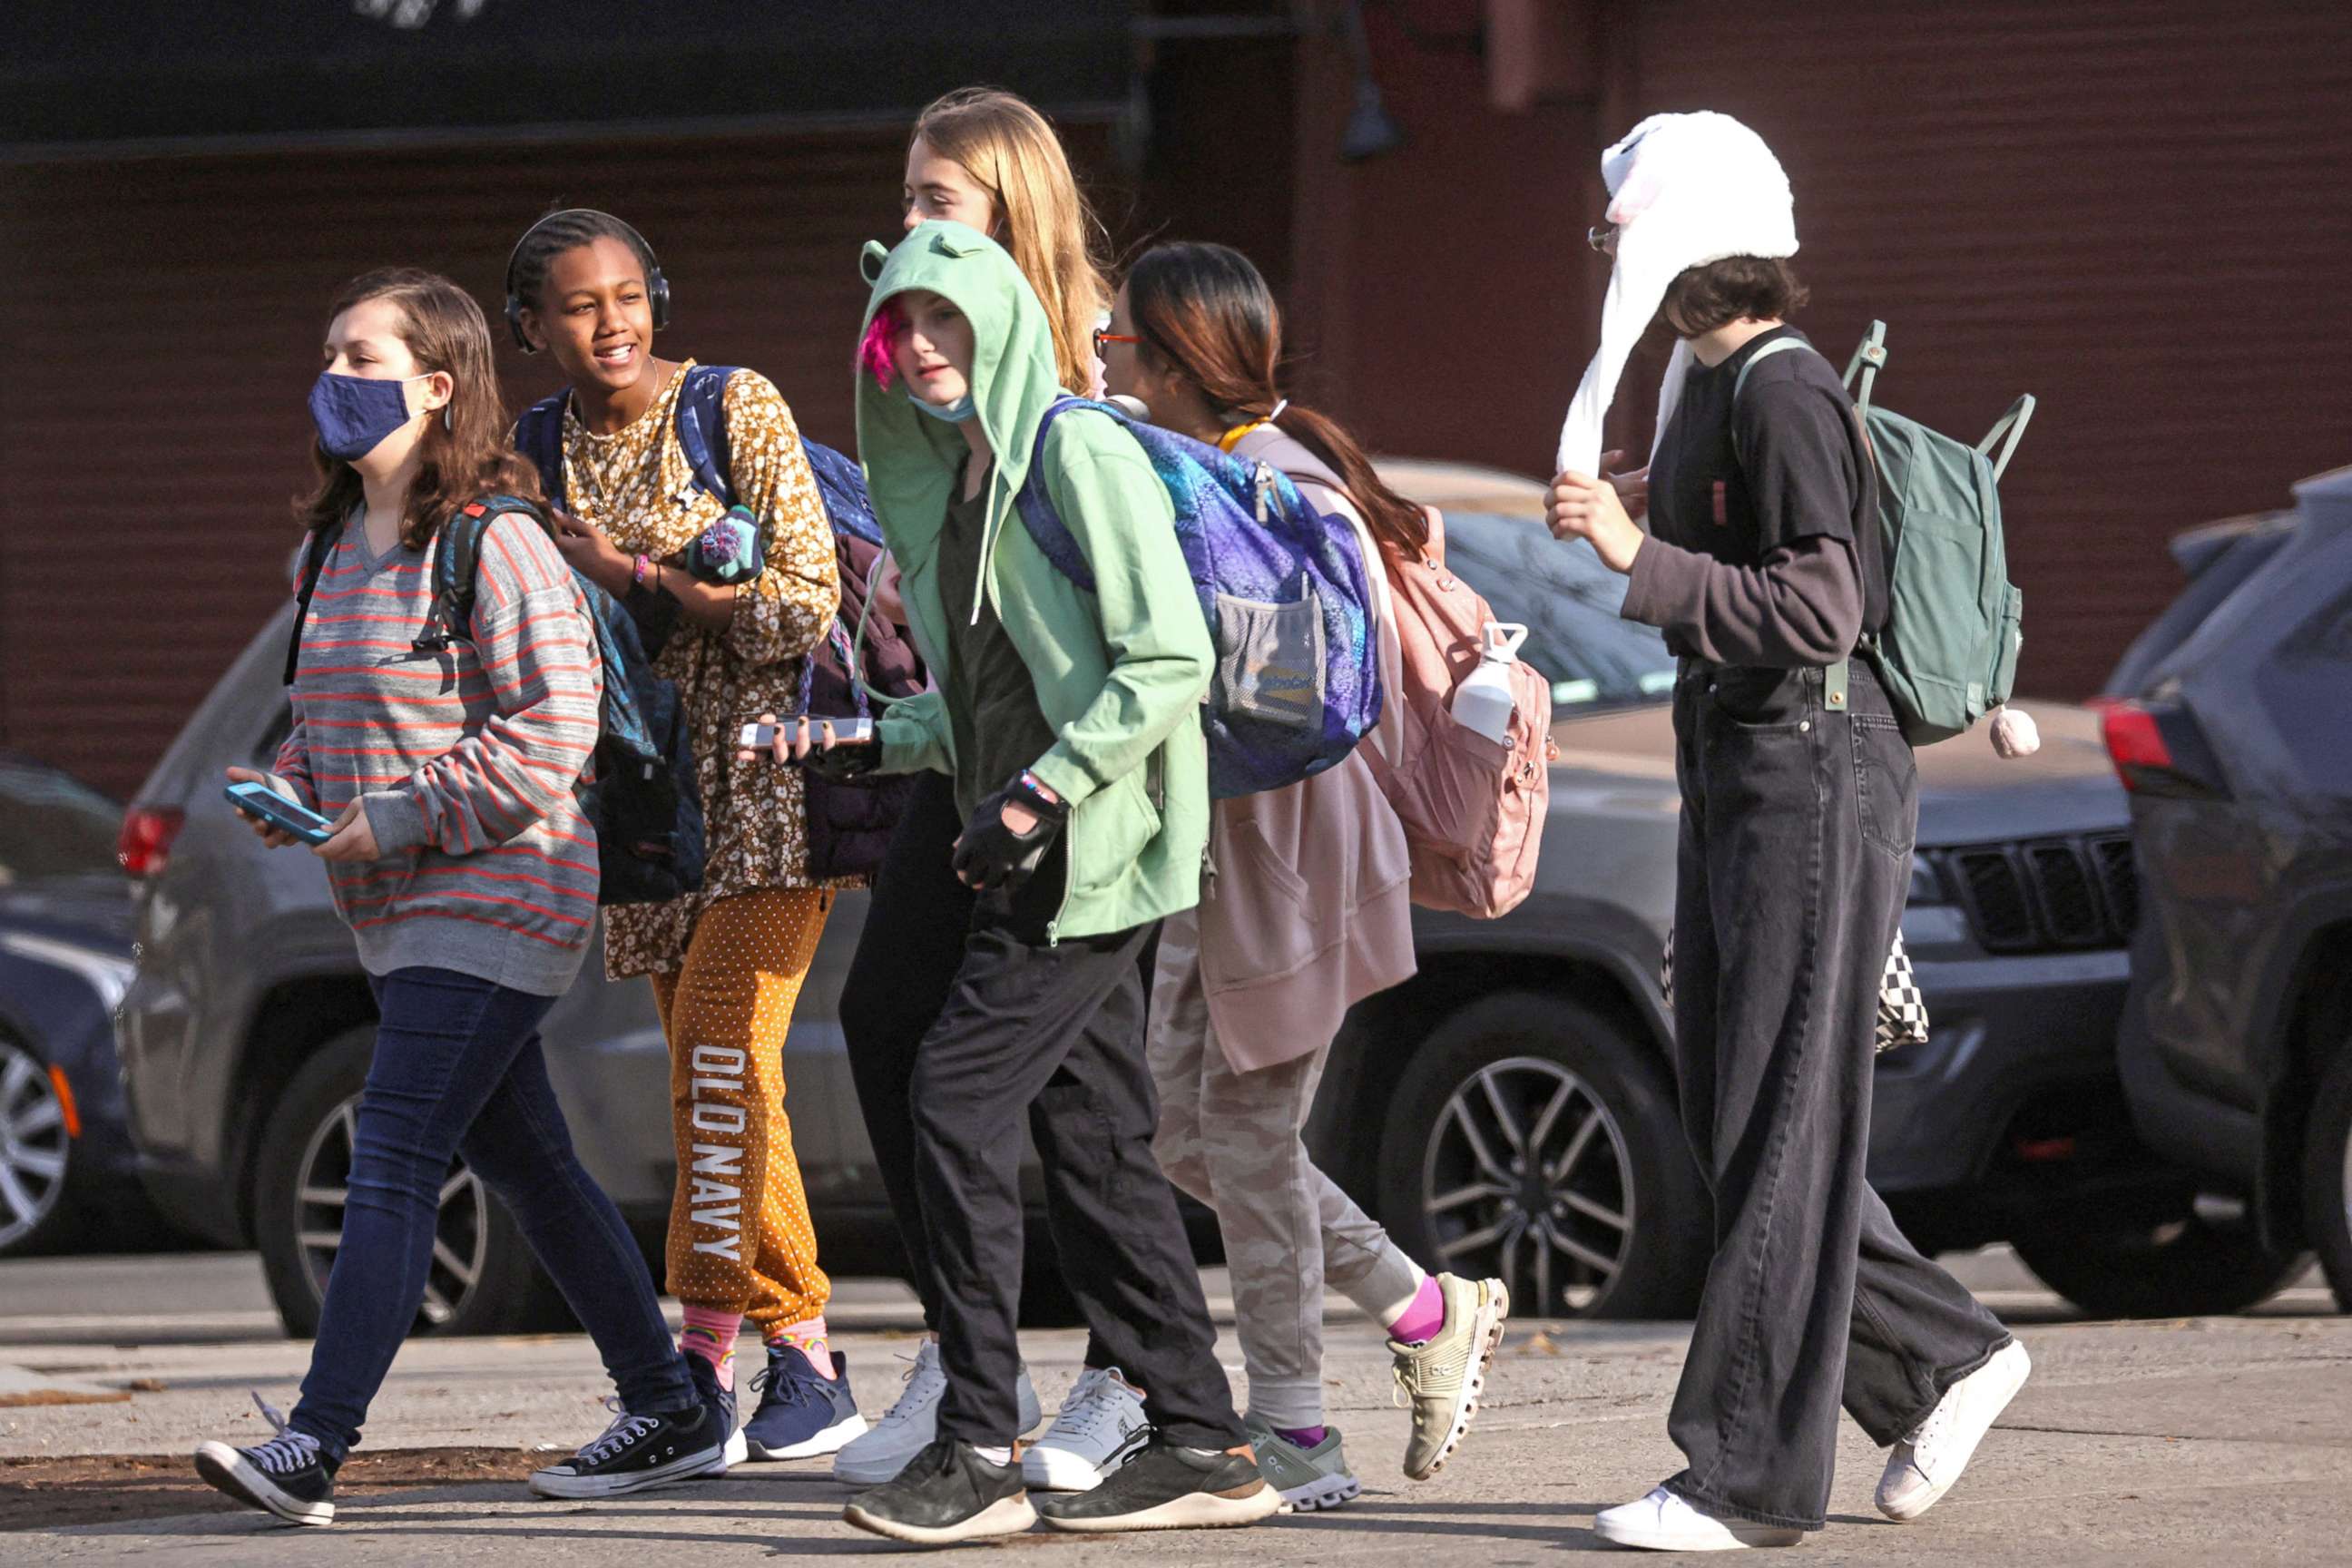 PHOTO: Children are seen walking to school, on the first day of lifting the indoor mask mandate for DOE schools between K through 12, in the Brooklyn borough of New York City, March 7, 2022.